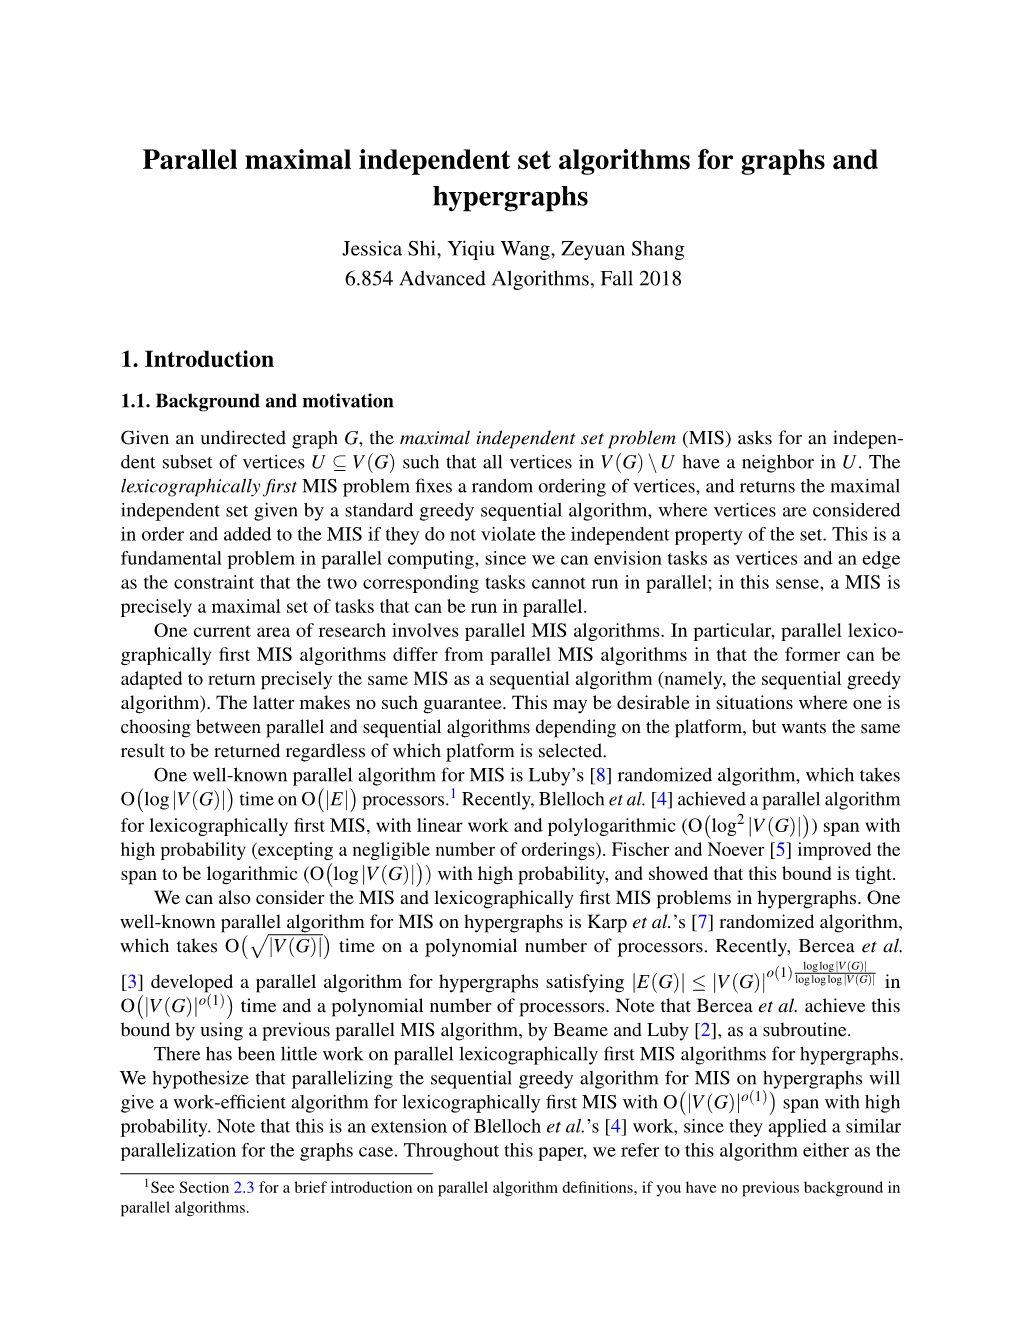 Parallel Maximal Independent Set Algorithms for Graphs and Hypergraphs